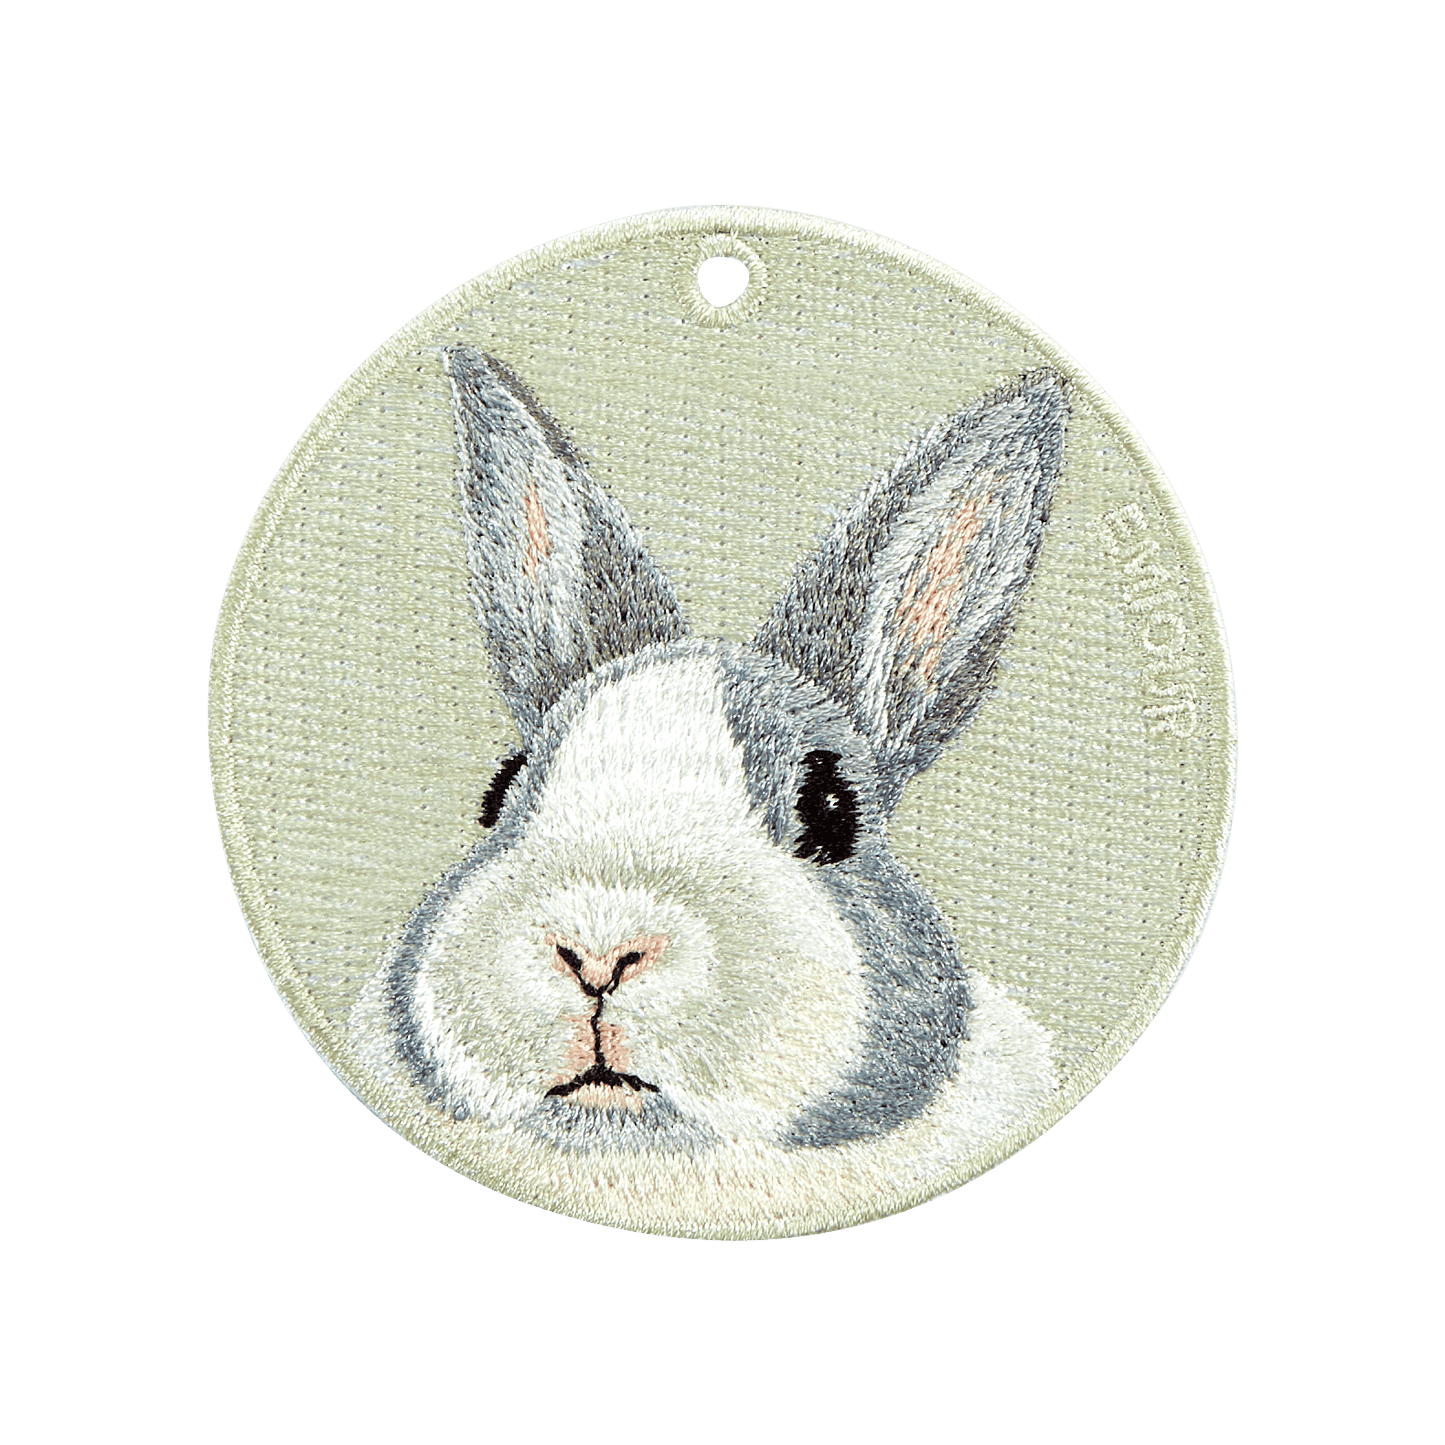 Reversible Embroidered Charm - Rabbit